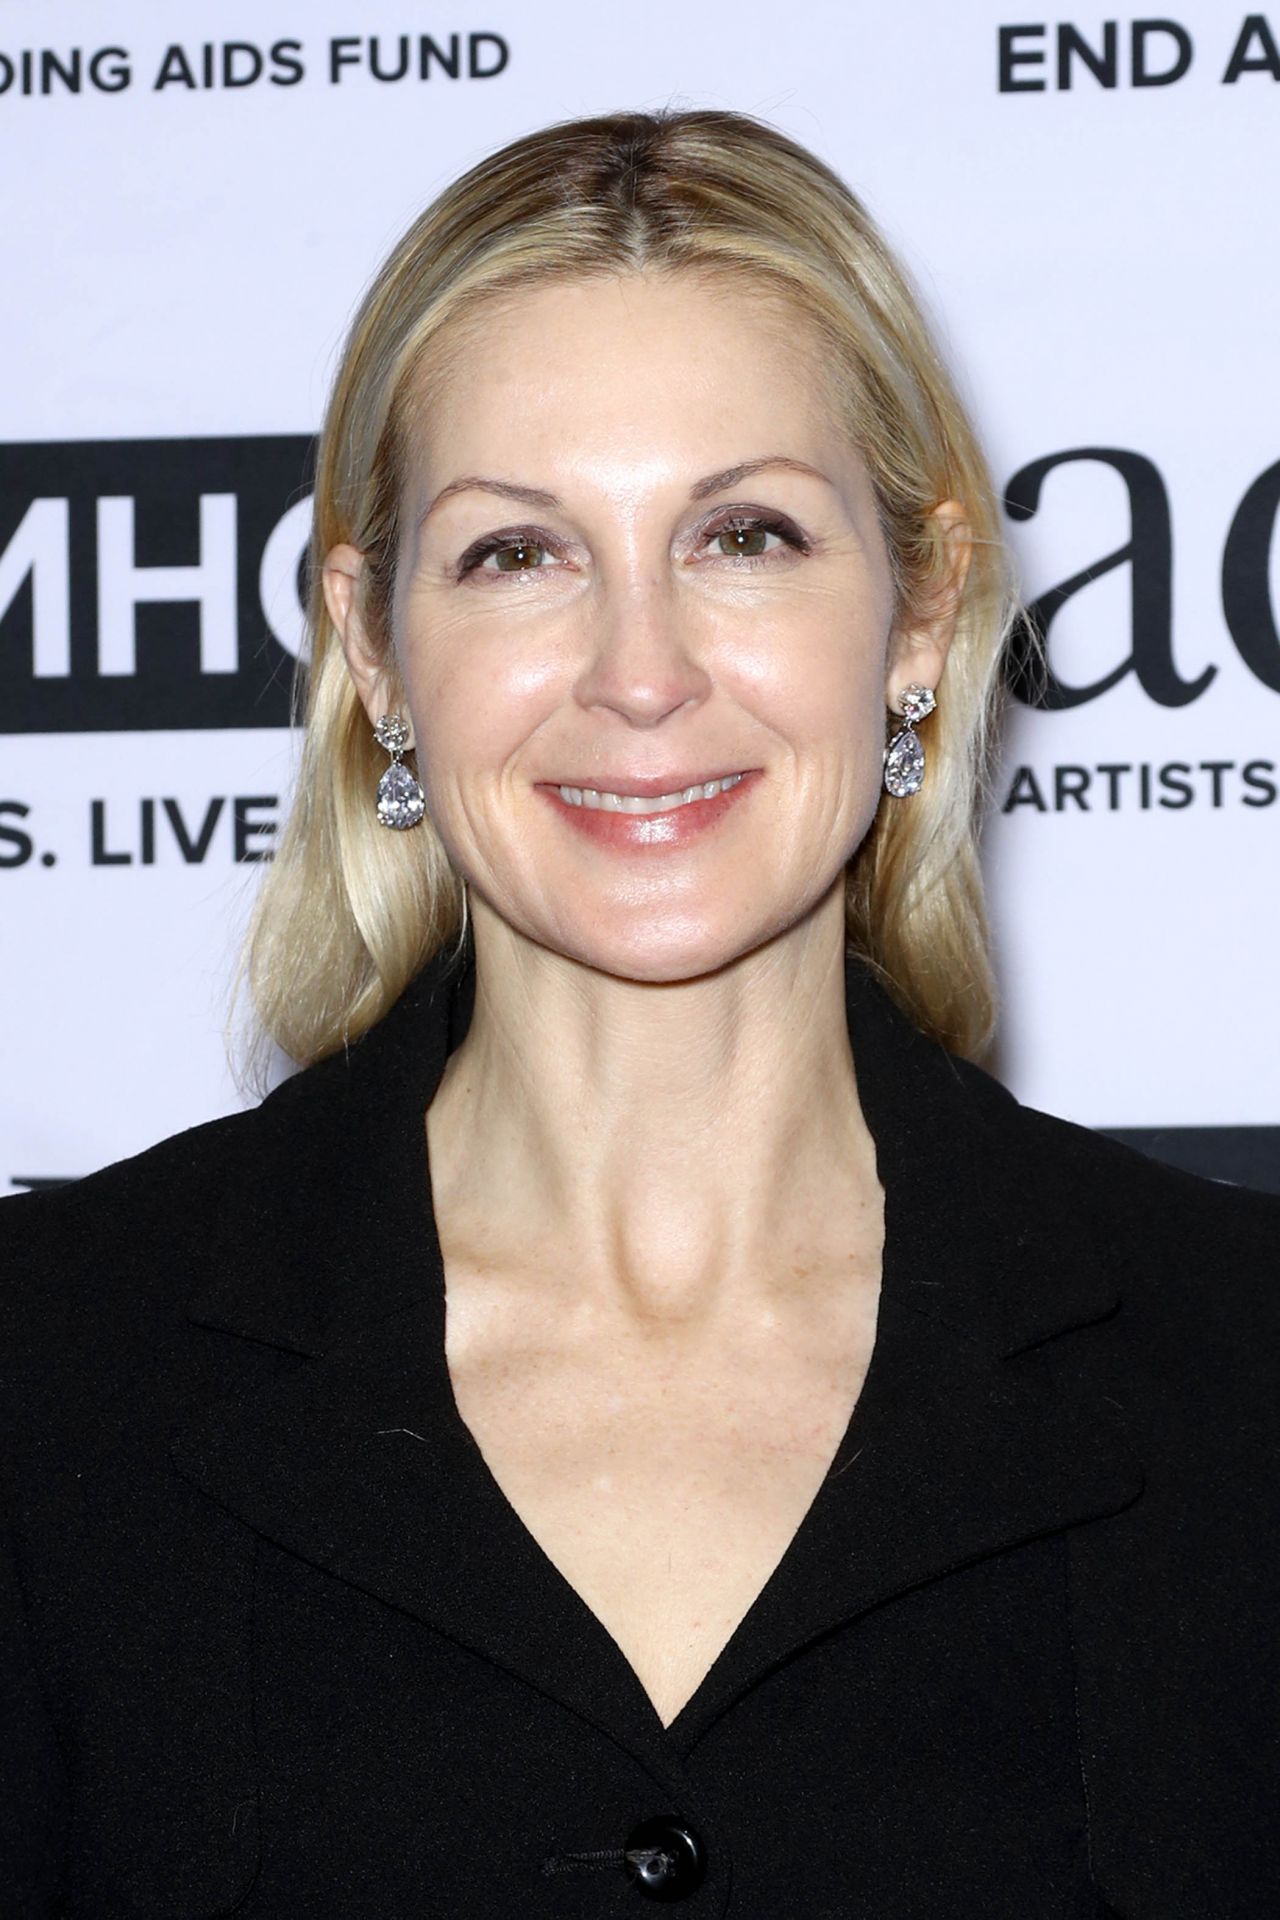 Kelly Rutherford – ACRIA Holiday Dinner in New York 12/14/2017